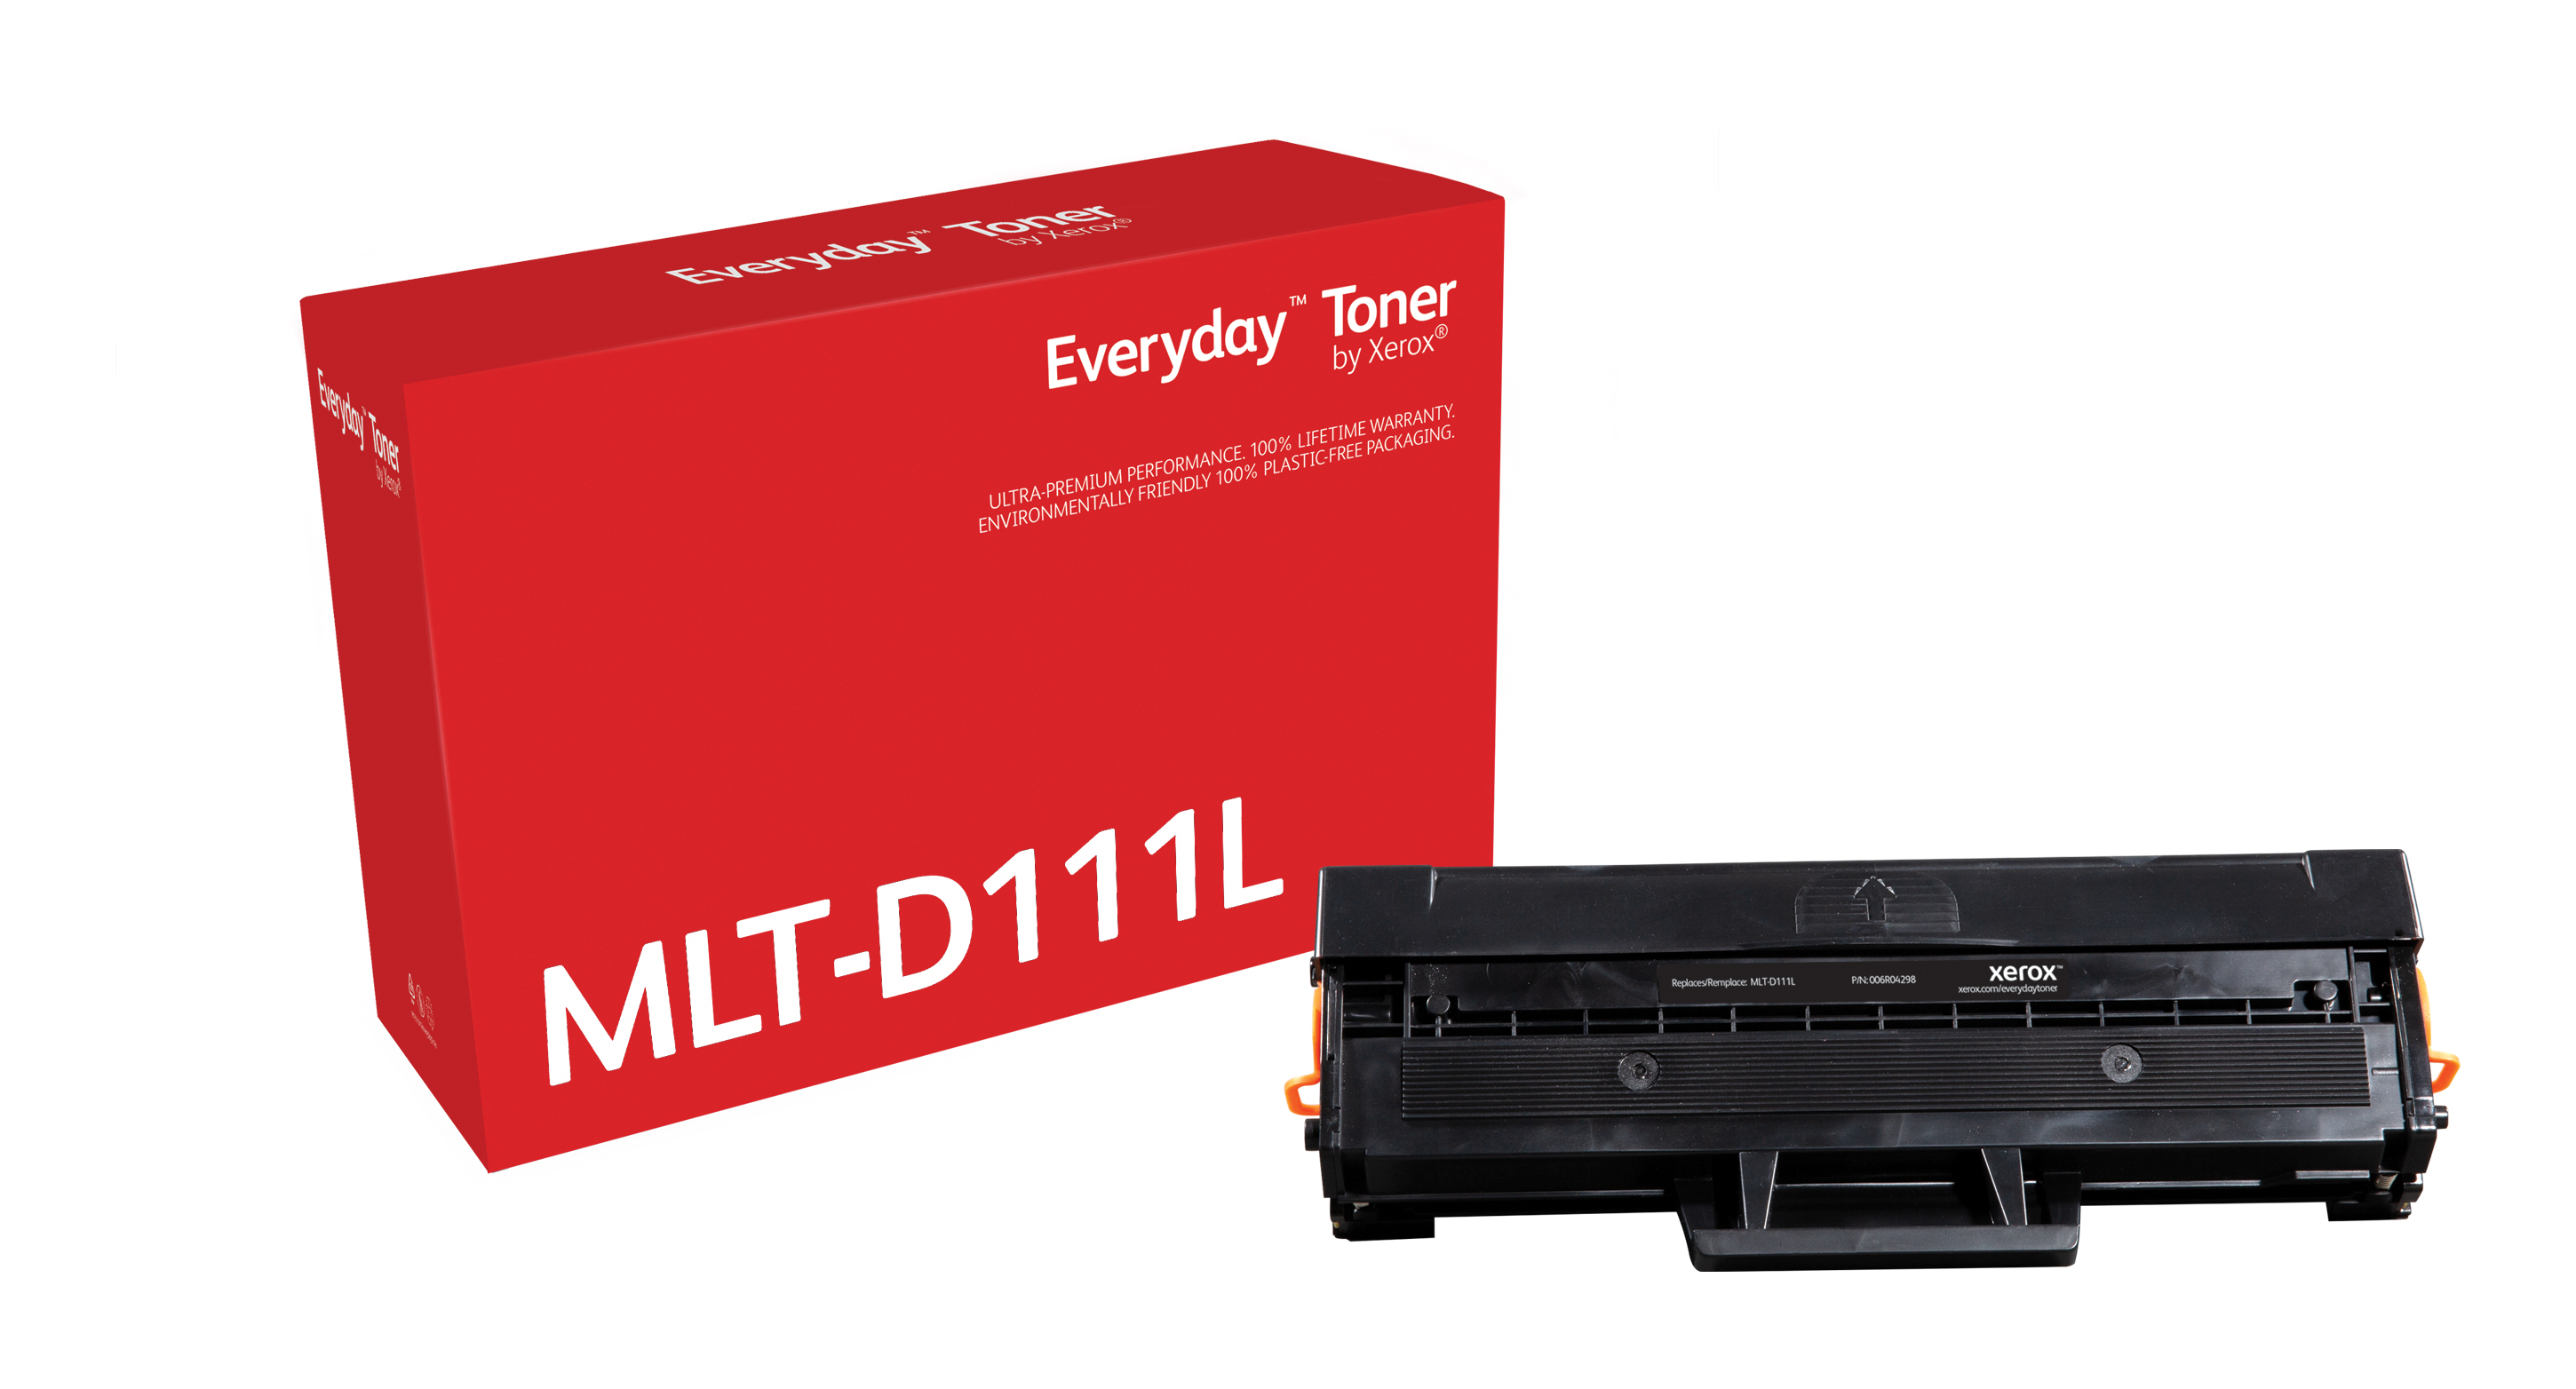 Everyday™ Black Toner by Xerox compatible with Samsung MLT-D111L, High  Yield 006R04298 Genuine Xerox Supplies